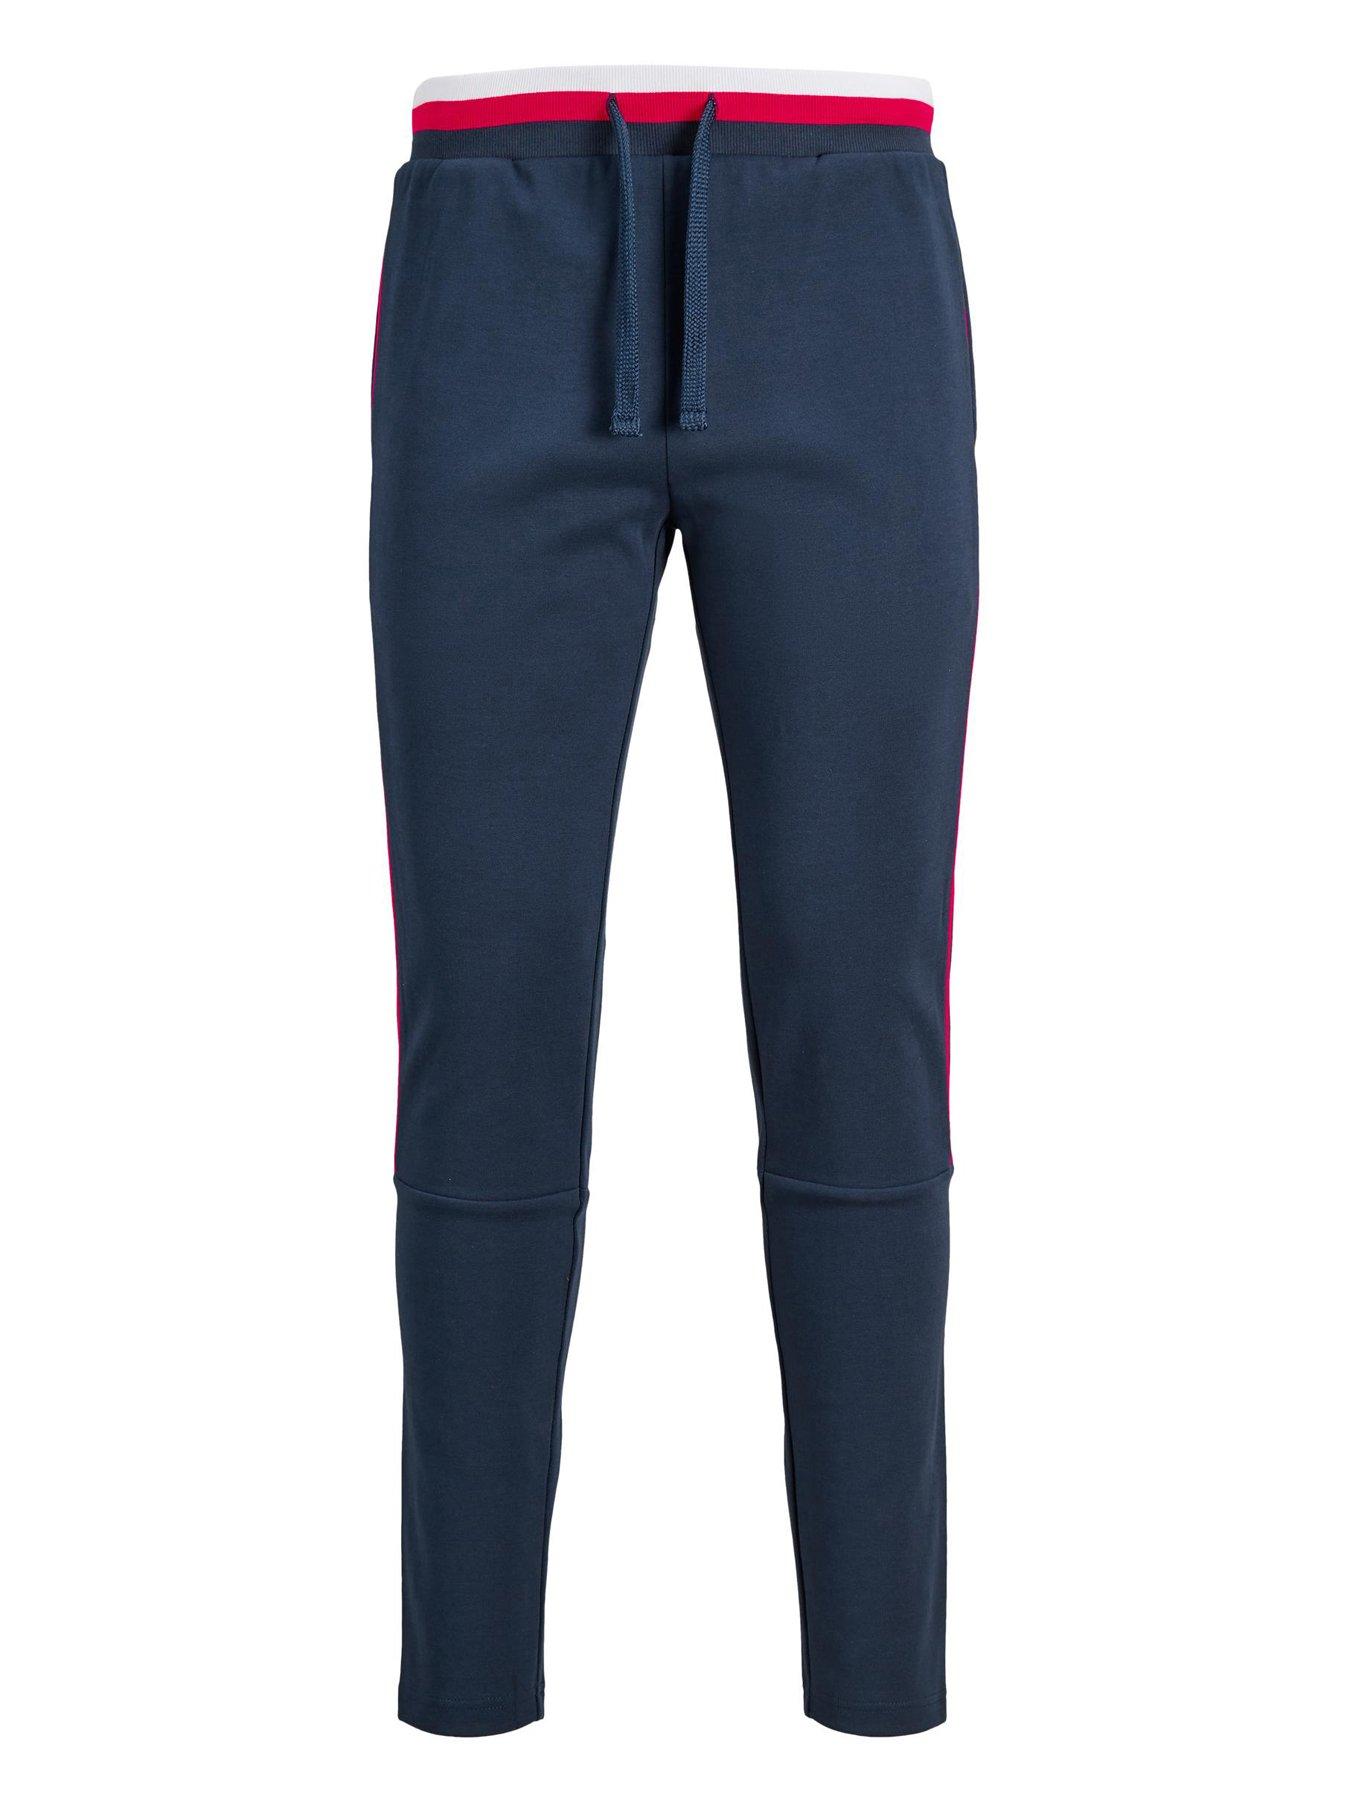  Skinny Fit Piping Joggers - Navy